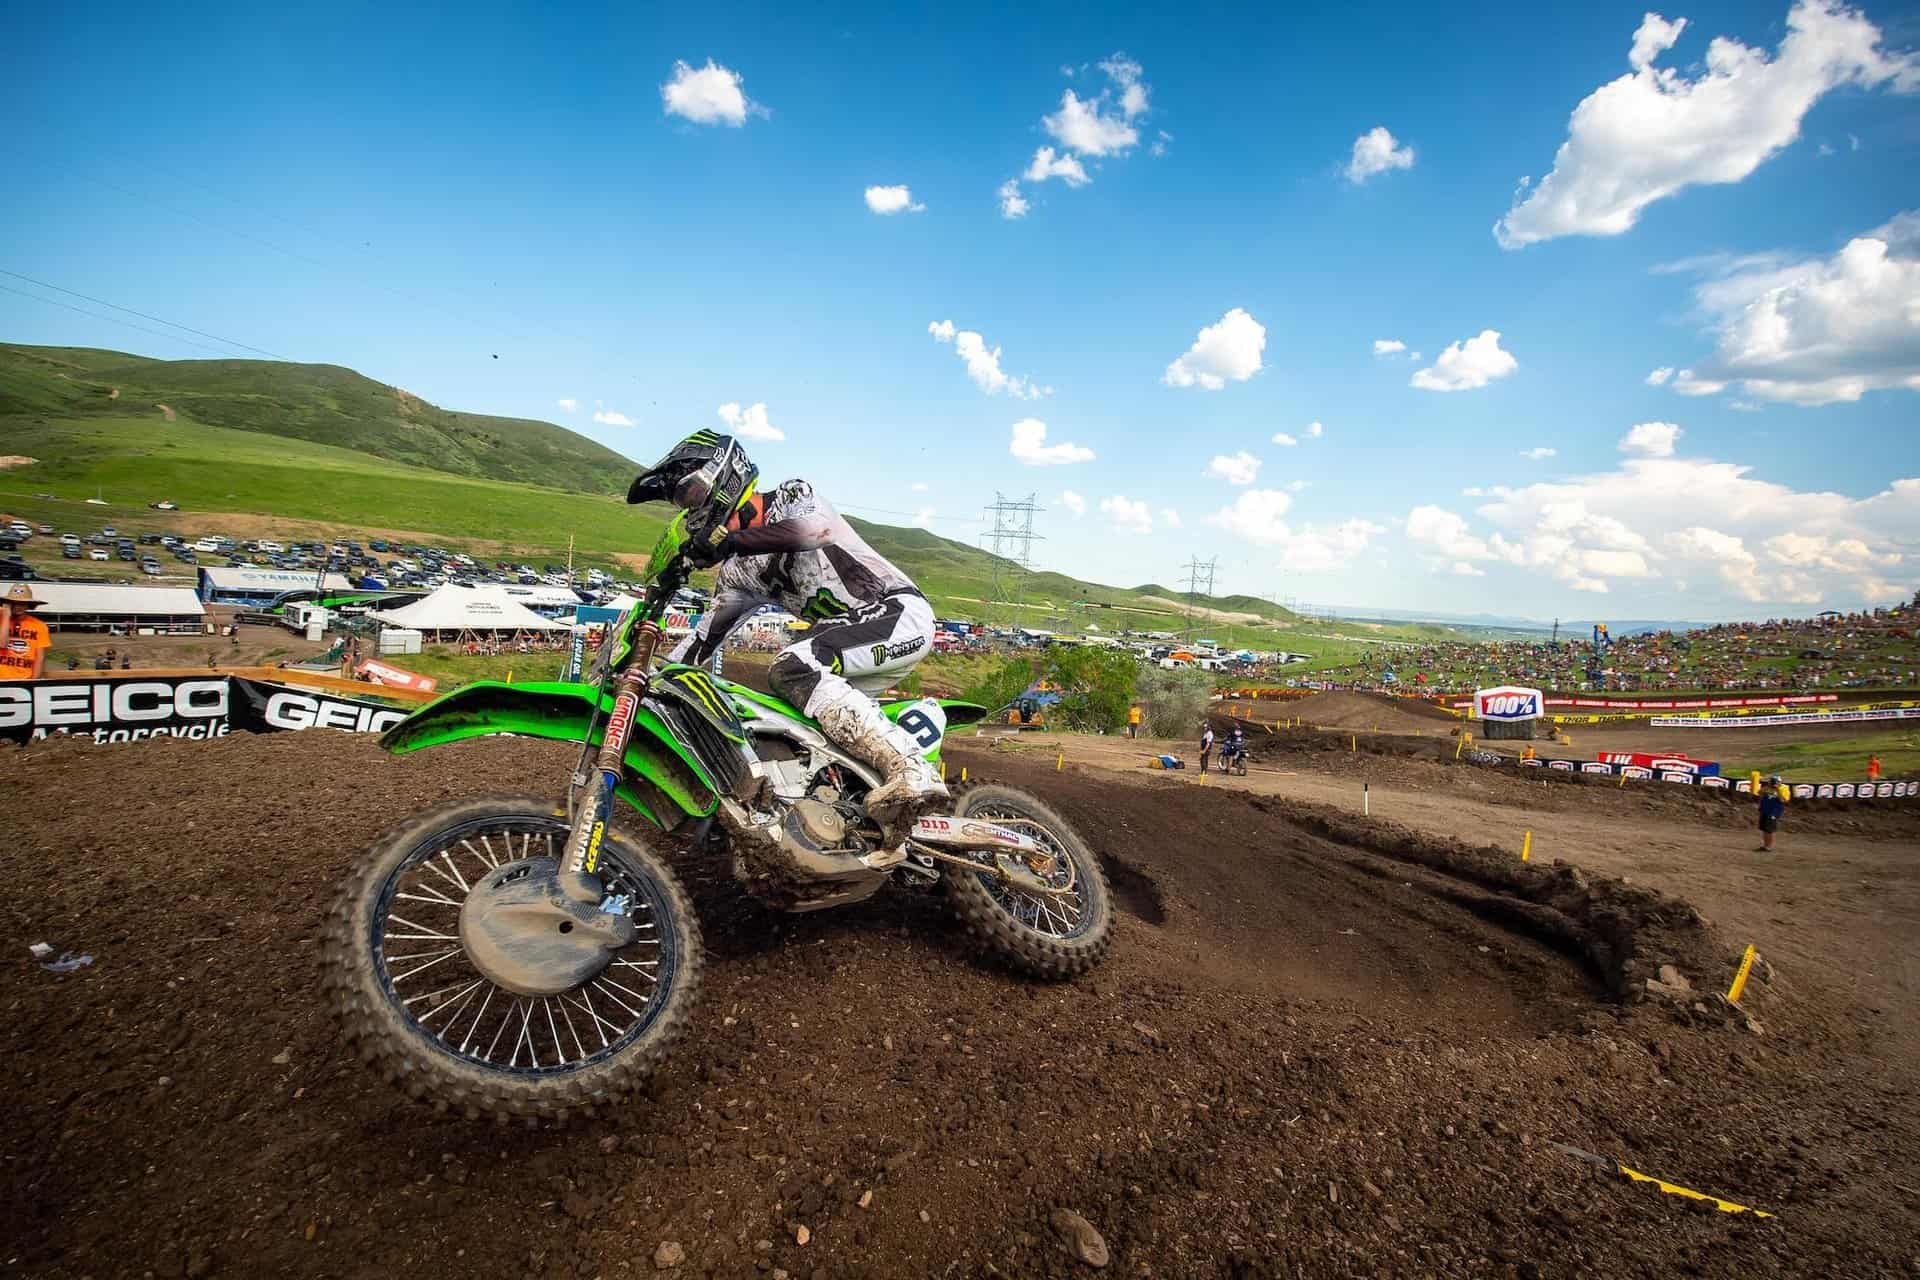 Adam Cianciarulo races at Thunder Valley Motorsports Park to a third overall finish in the 2021 Lucas Oil Pro Motocross Championship season. Photo by Align Media.